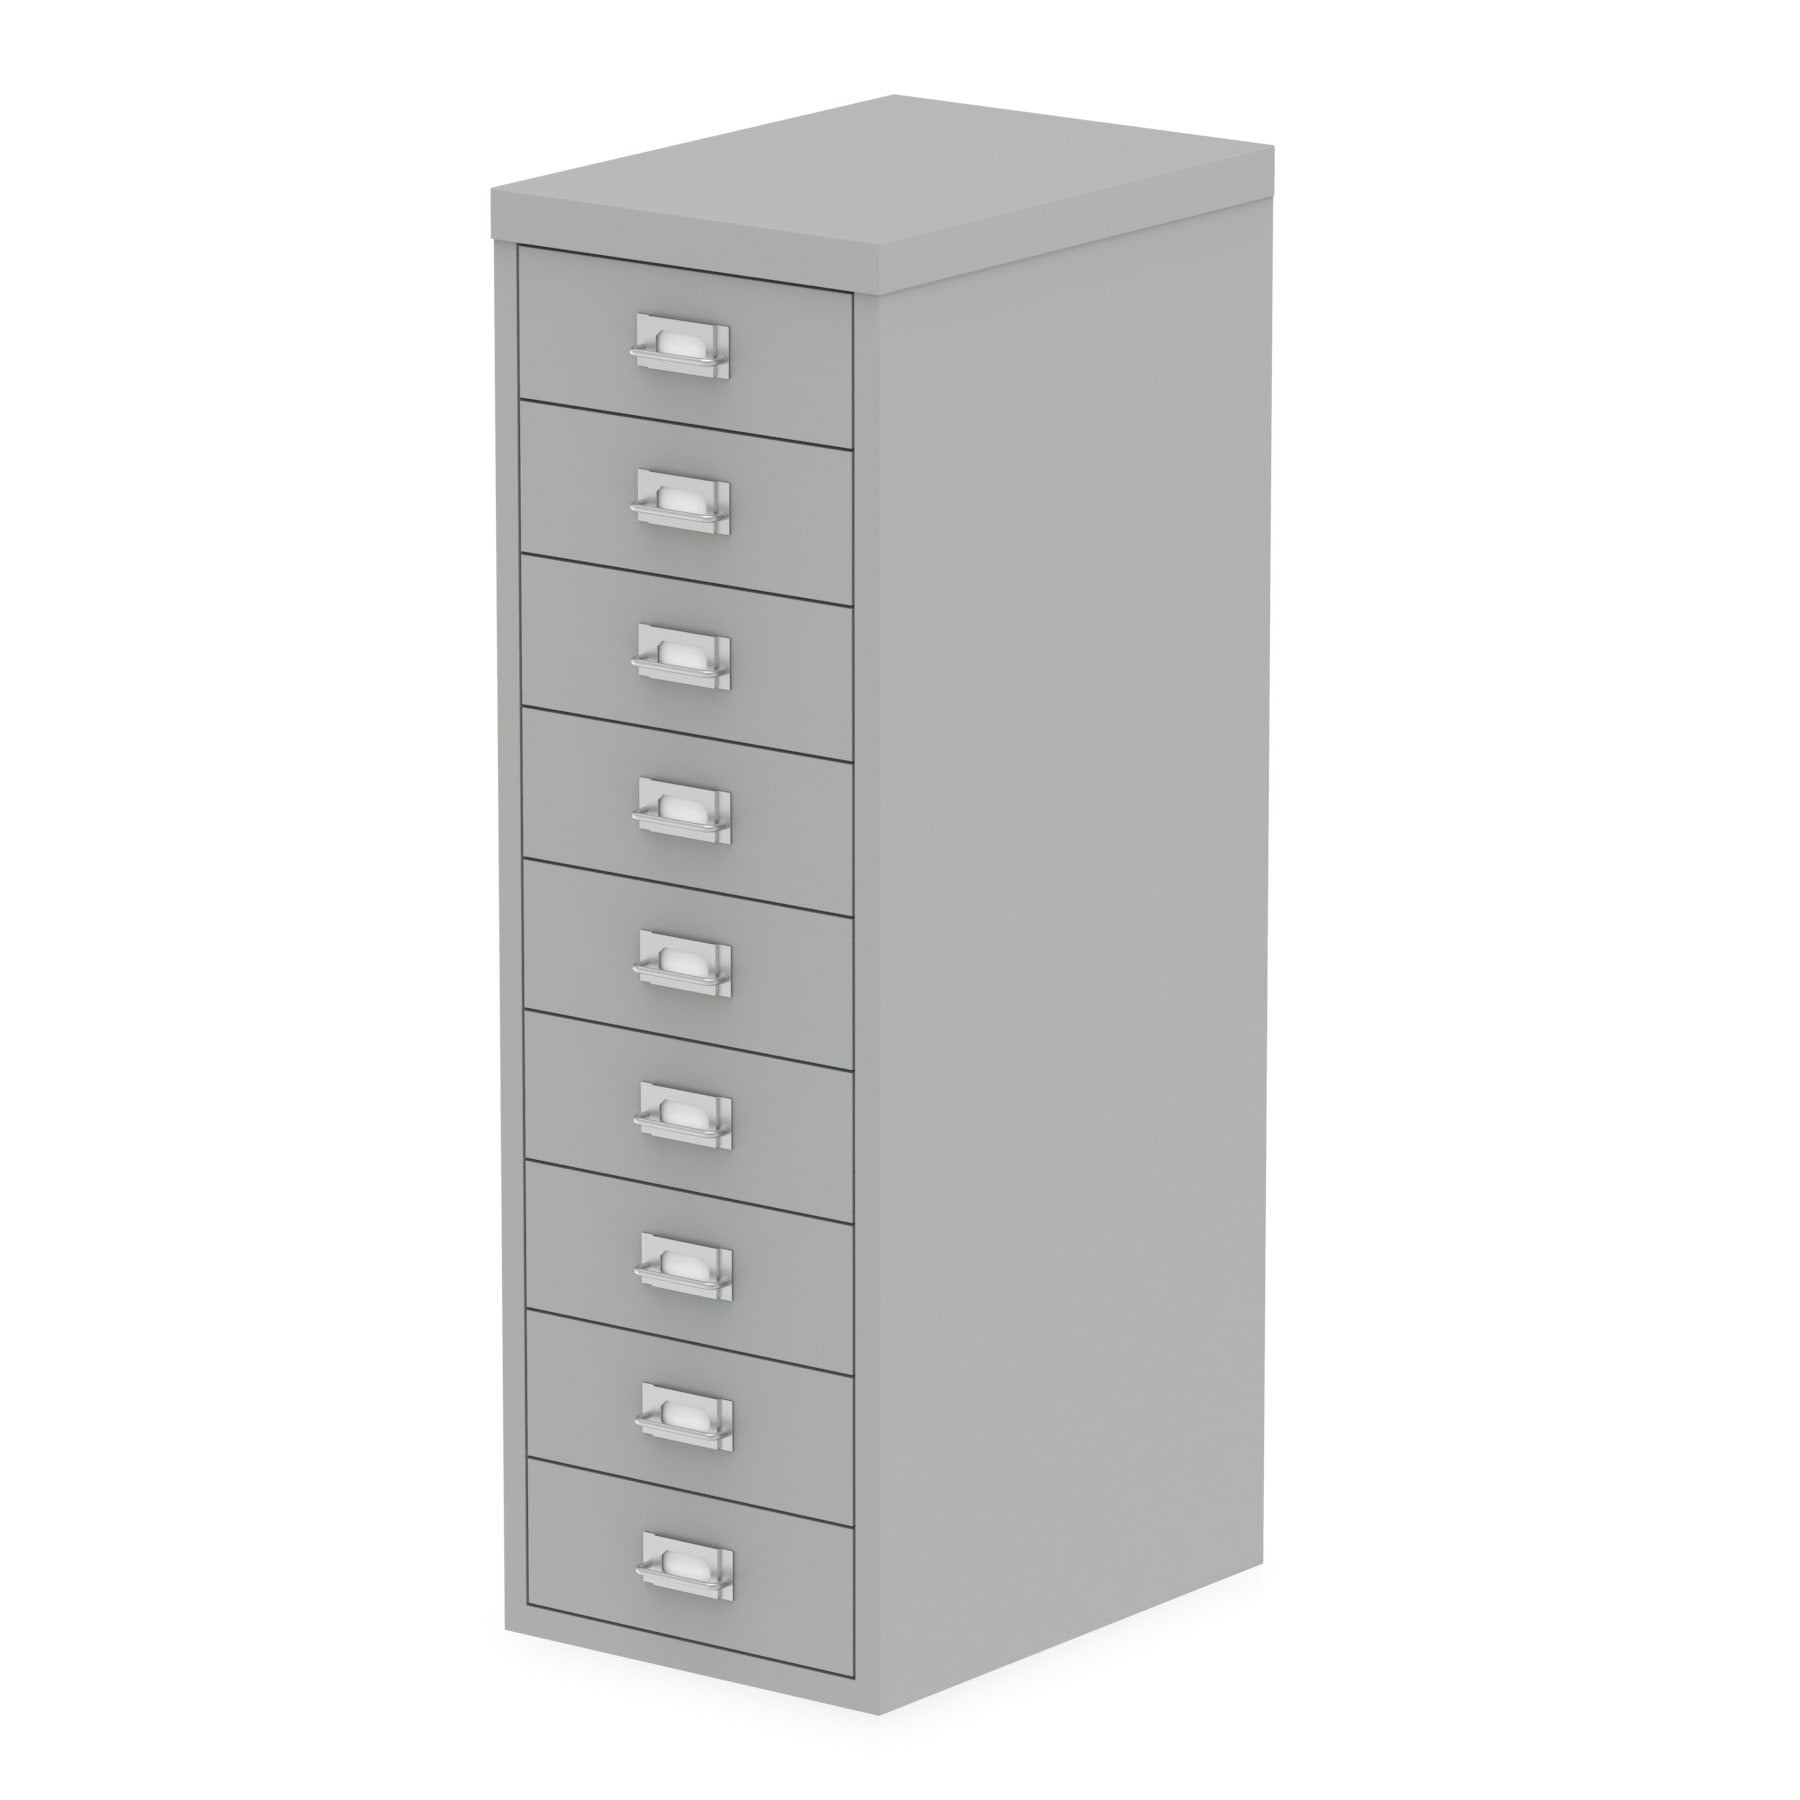 Bisley Qube Multidrawer Storage Cabinet - 9 or 10 Steel Drawers, 279x380x590/860mm, 5-Year Guarantee, No Assembly